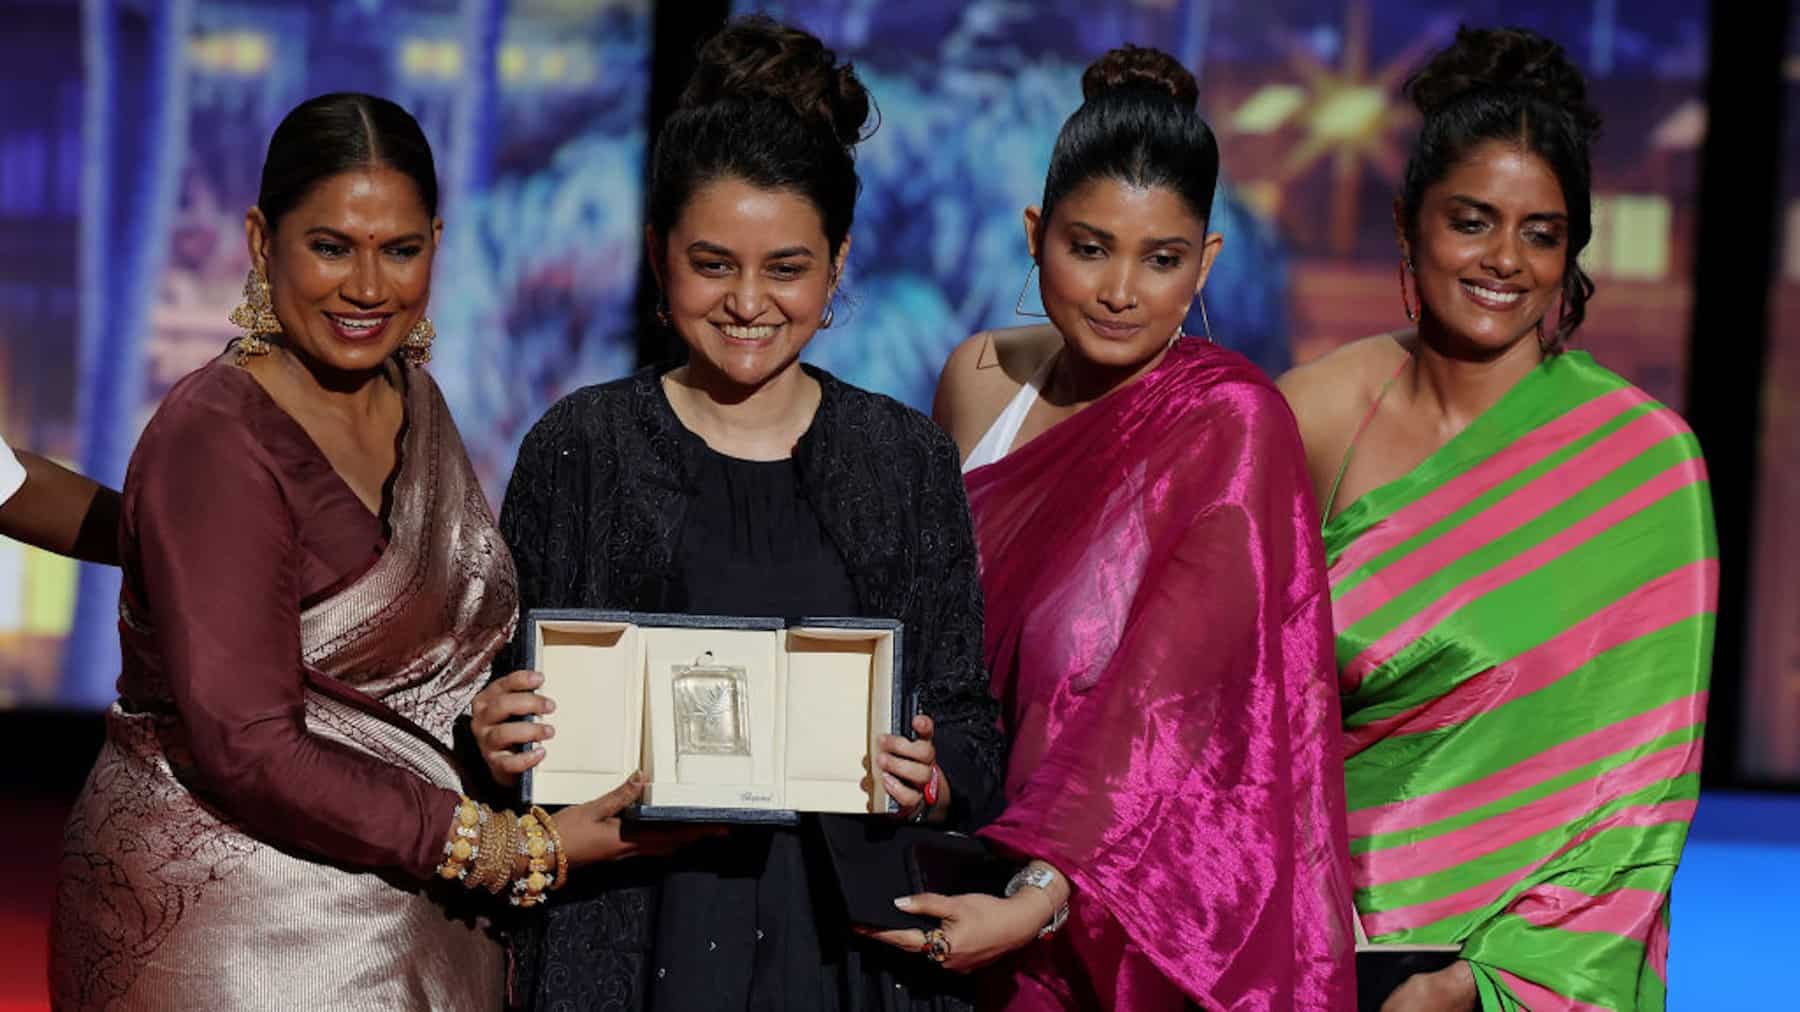 https://www.mobilemasala.com/film-gossip/Payal-Kapadia-after-winning-Grand-Prix-Long-live-Indian-Cinema-with-all-its-differences-i268668